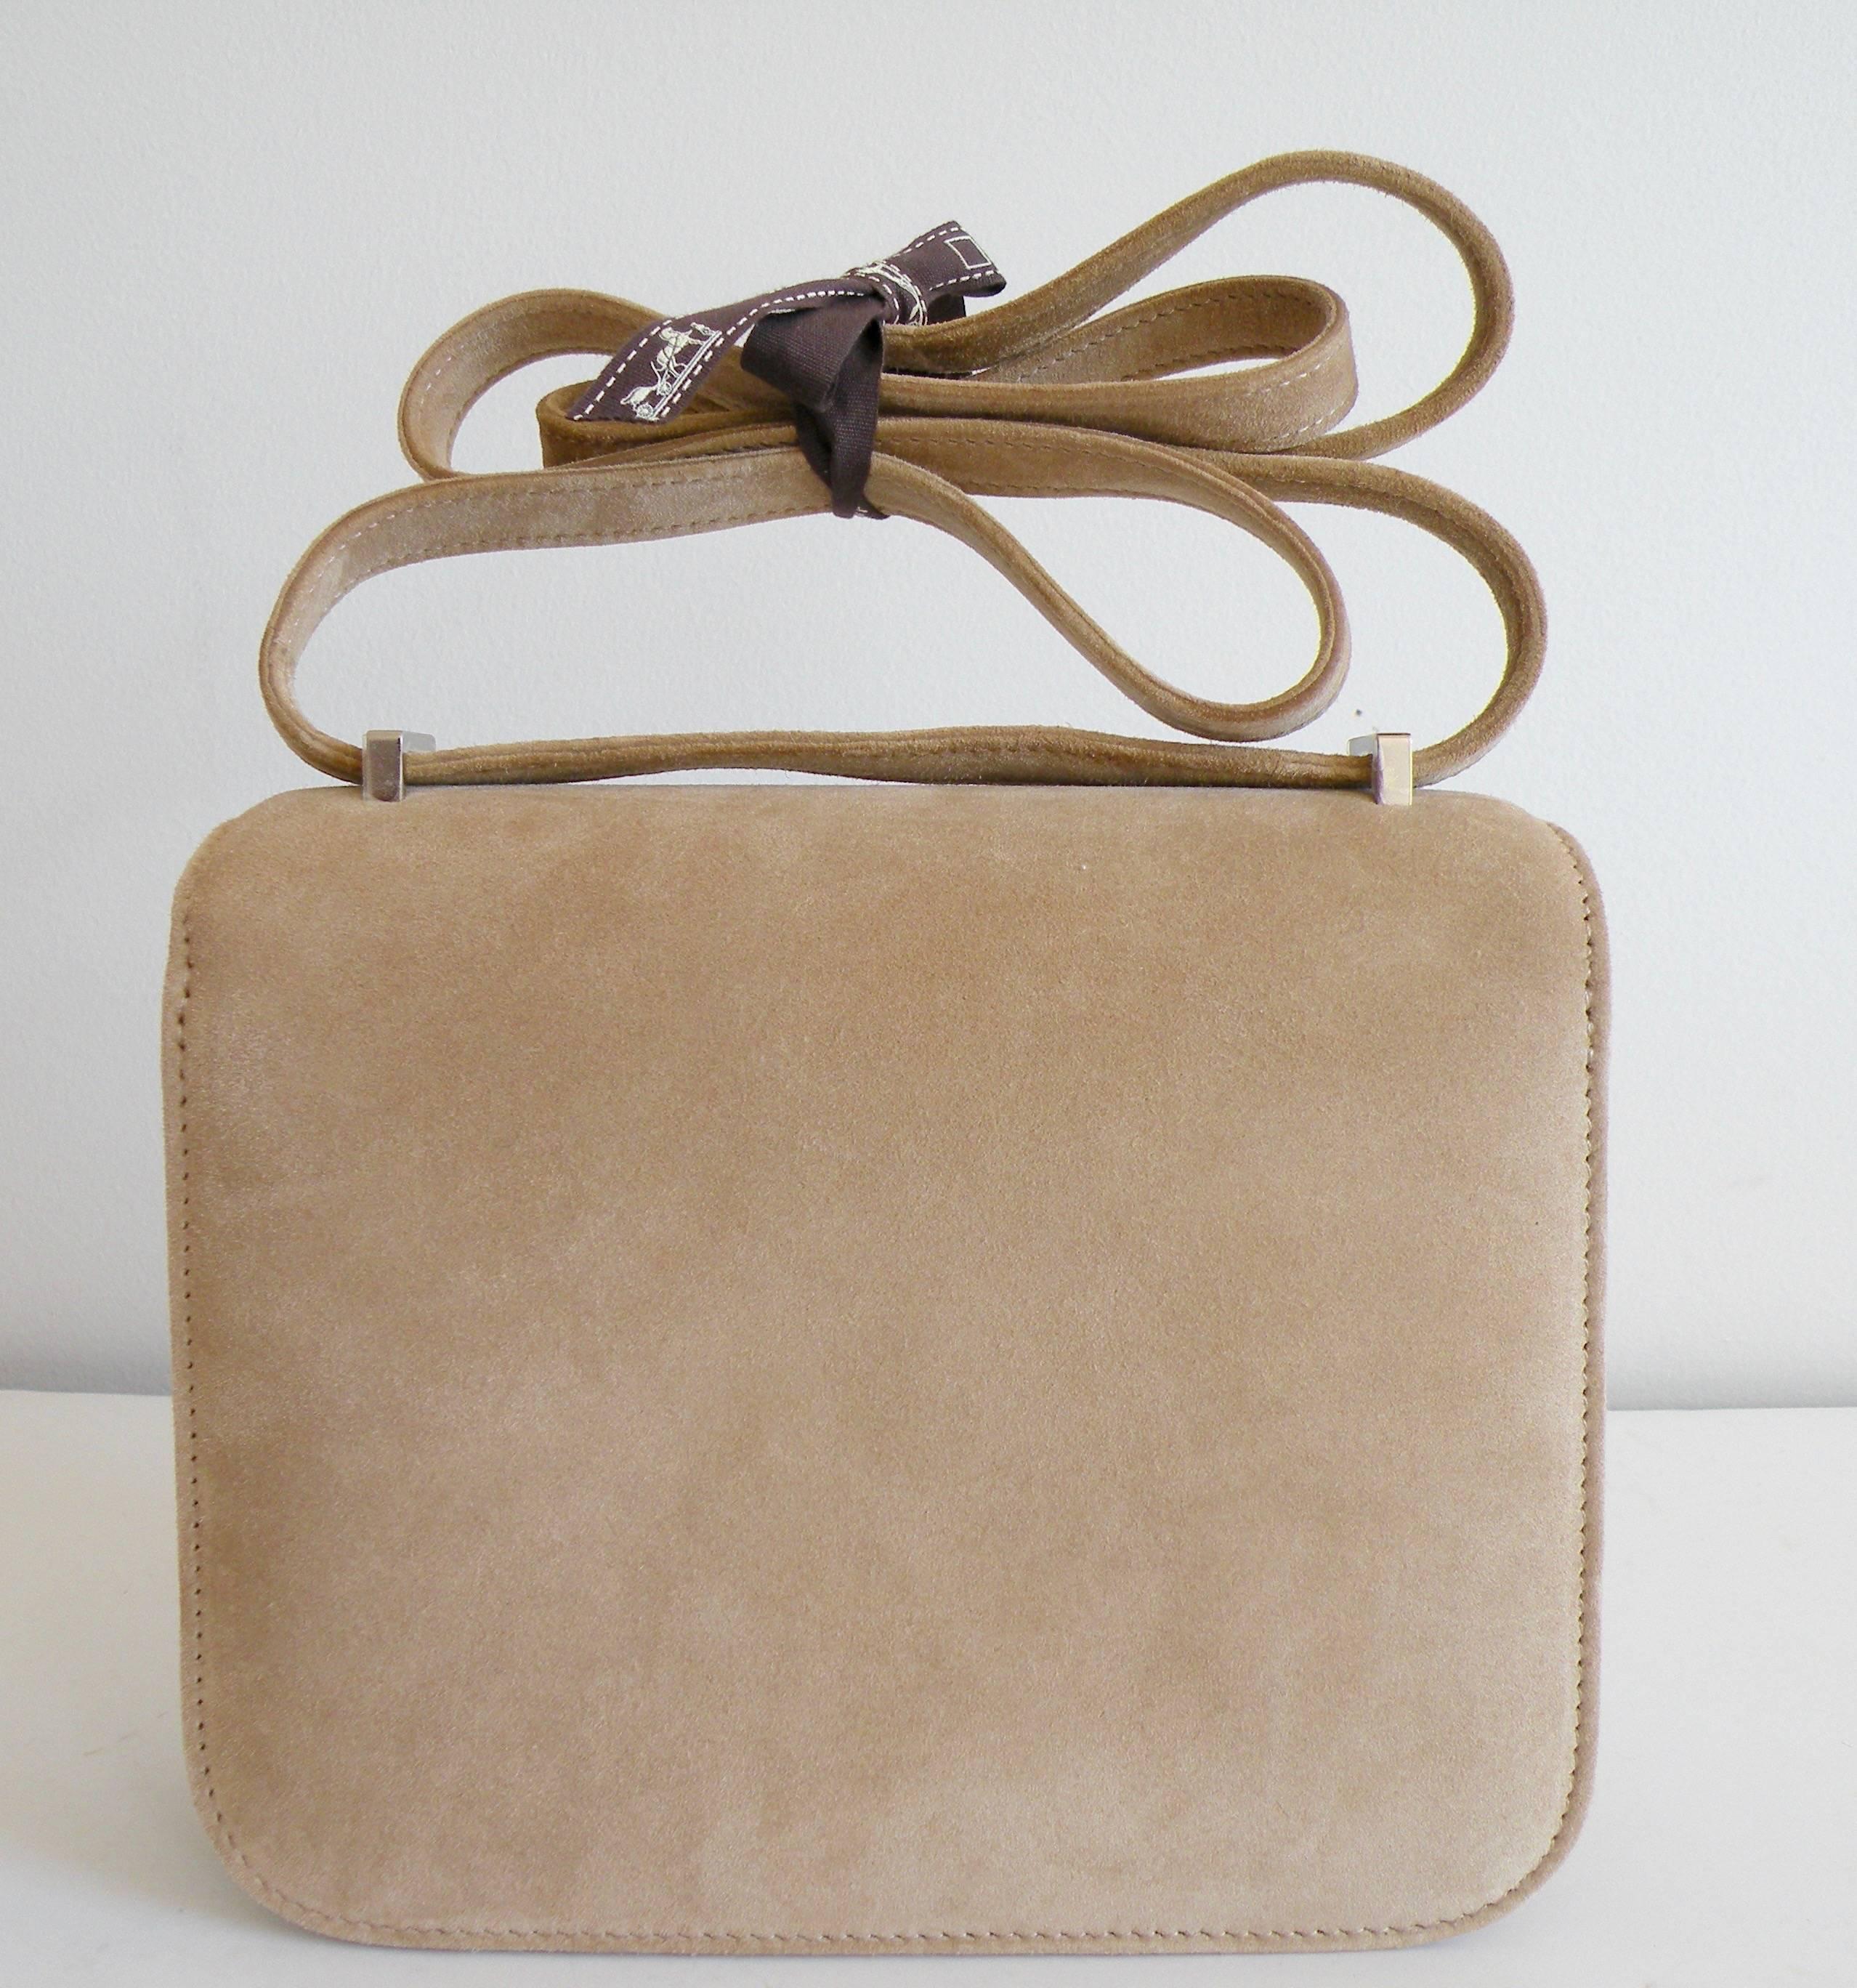 Hermès
Constance III
Bag 18cm
Done in Rare Doblis Suede 
Such an elegant bag
Color:  Biscuit
A beautiful off white/beige
Leather: Doblis Suede
Hardware: Palladium
Lined in Chevre
Impossible to find
This is one of the nices neutral colors, called